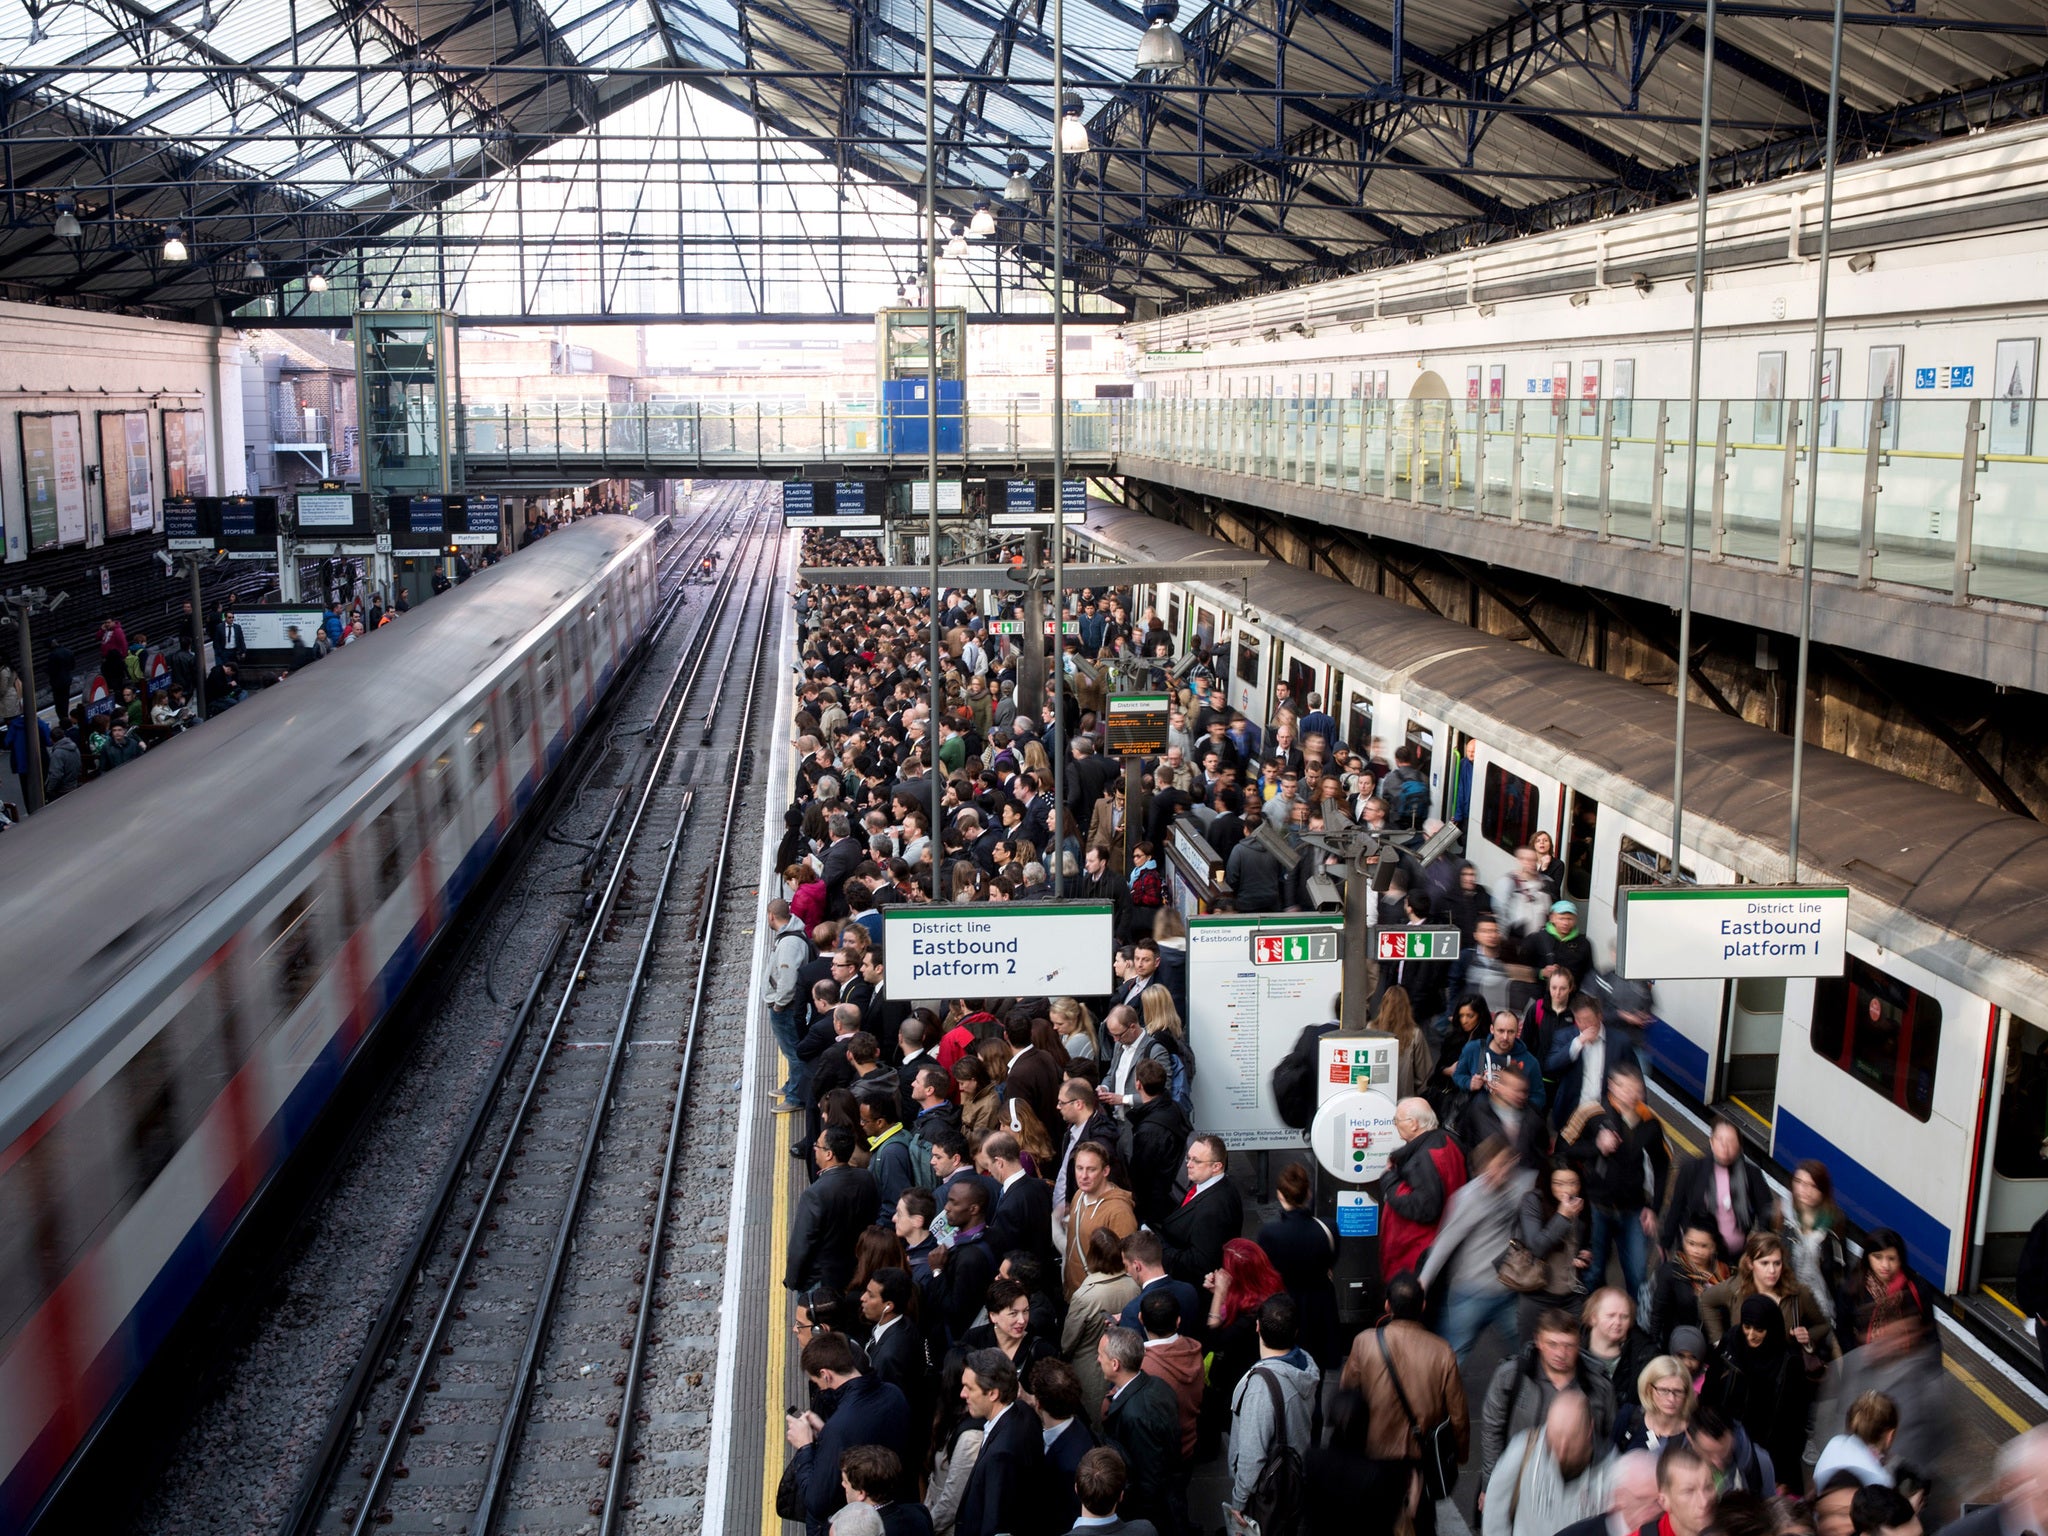 The Tube strike forced people to find alternative routes to work.